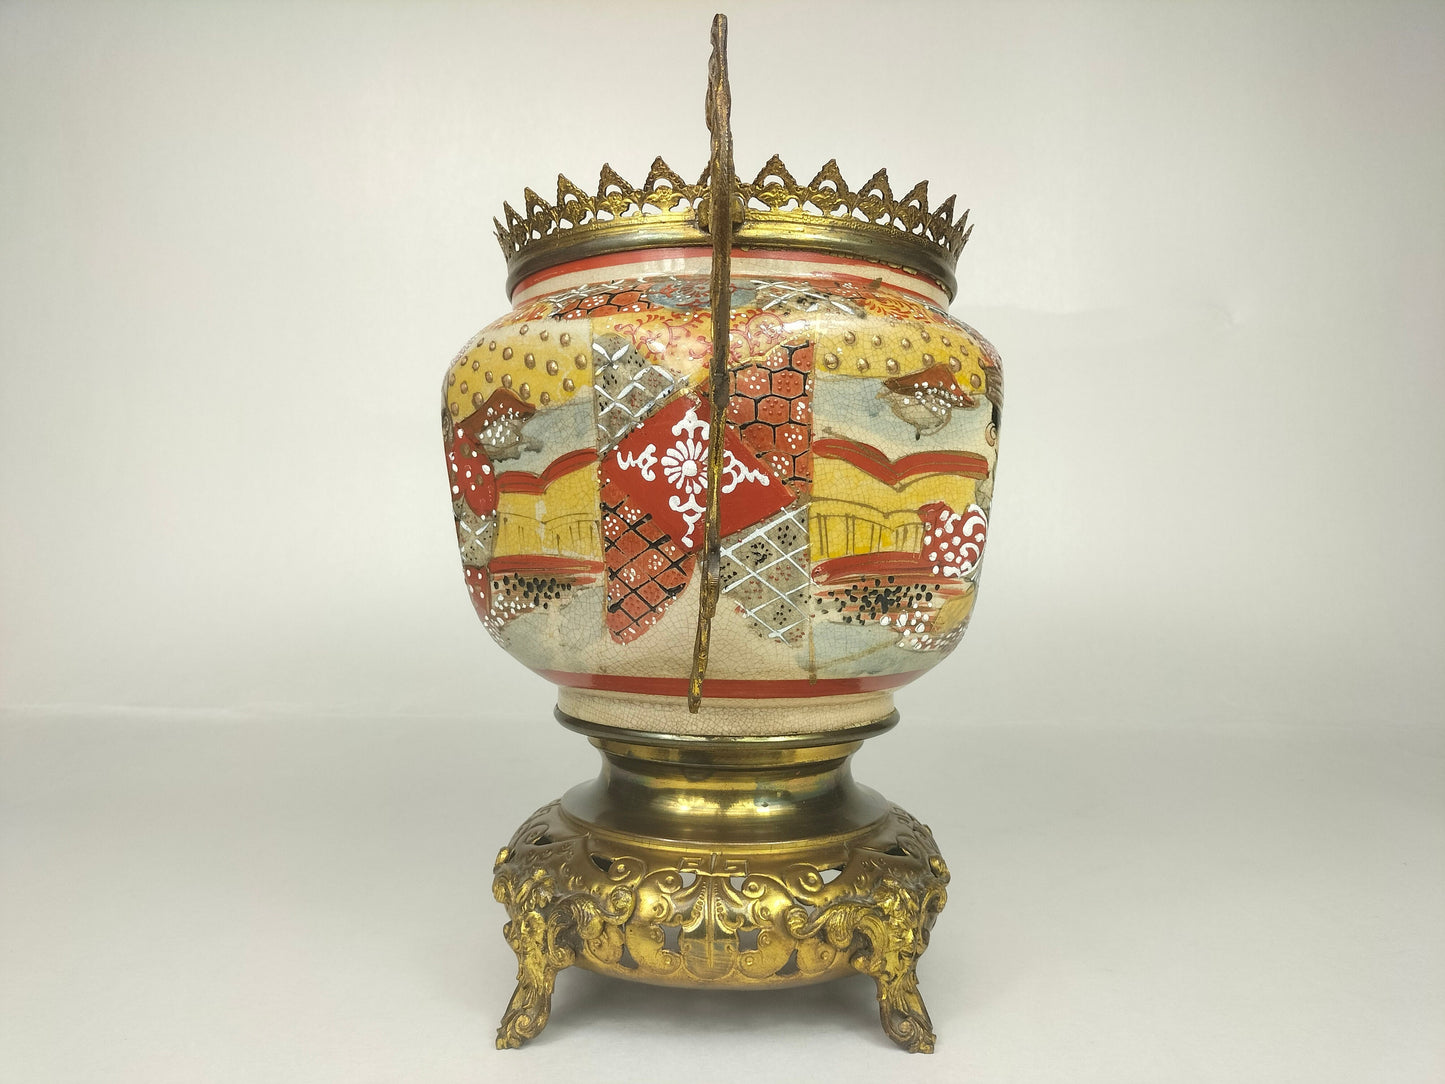 Antique Japanese satsuma jar decorated with gilded brass // 19th century - Meiji Period